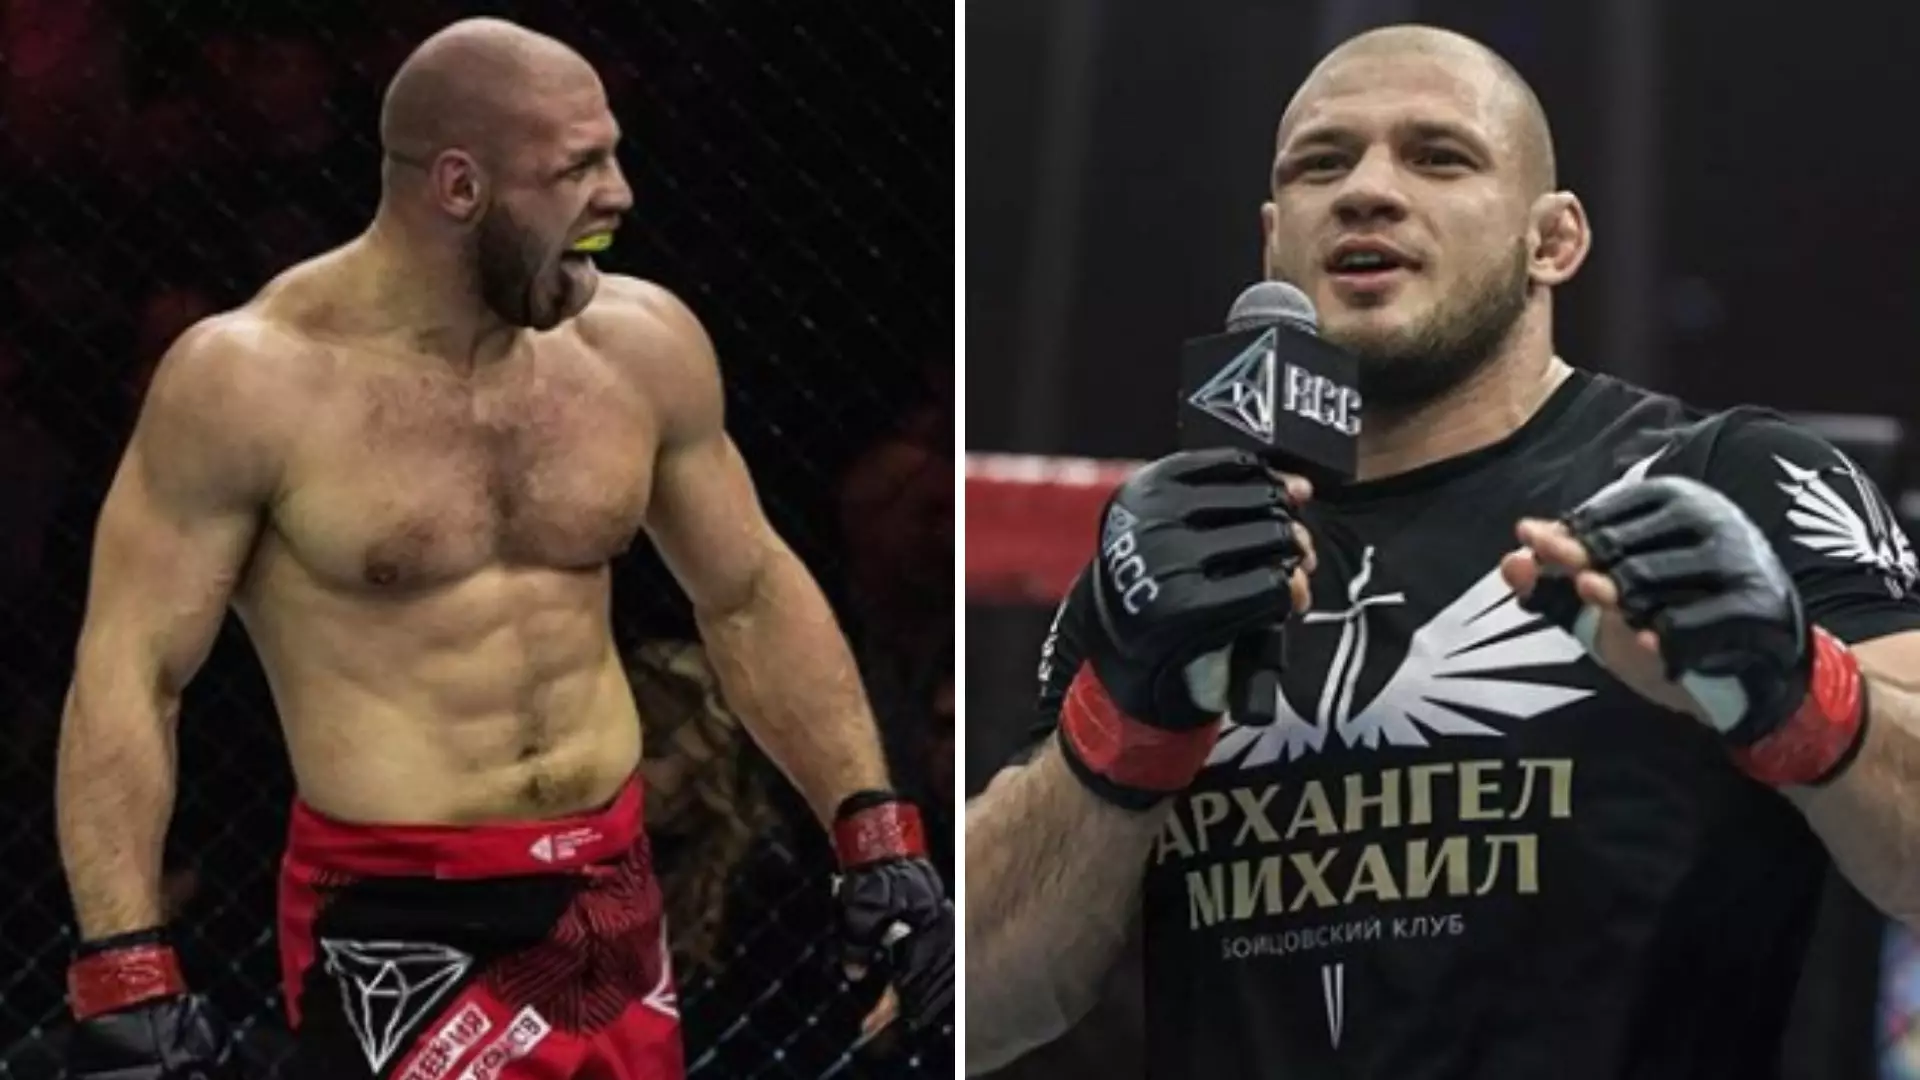 Russian ‘Ural Hulk’ Ivan Shtyrkov Has Signed With The UFC